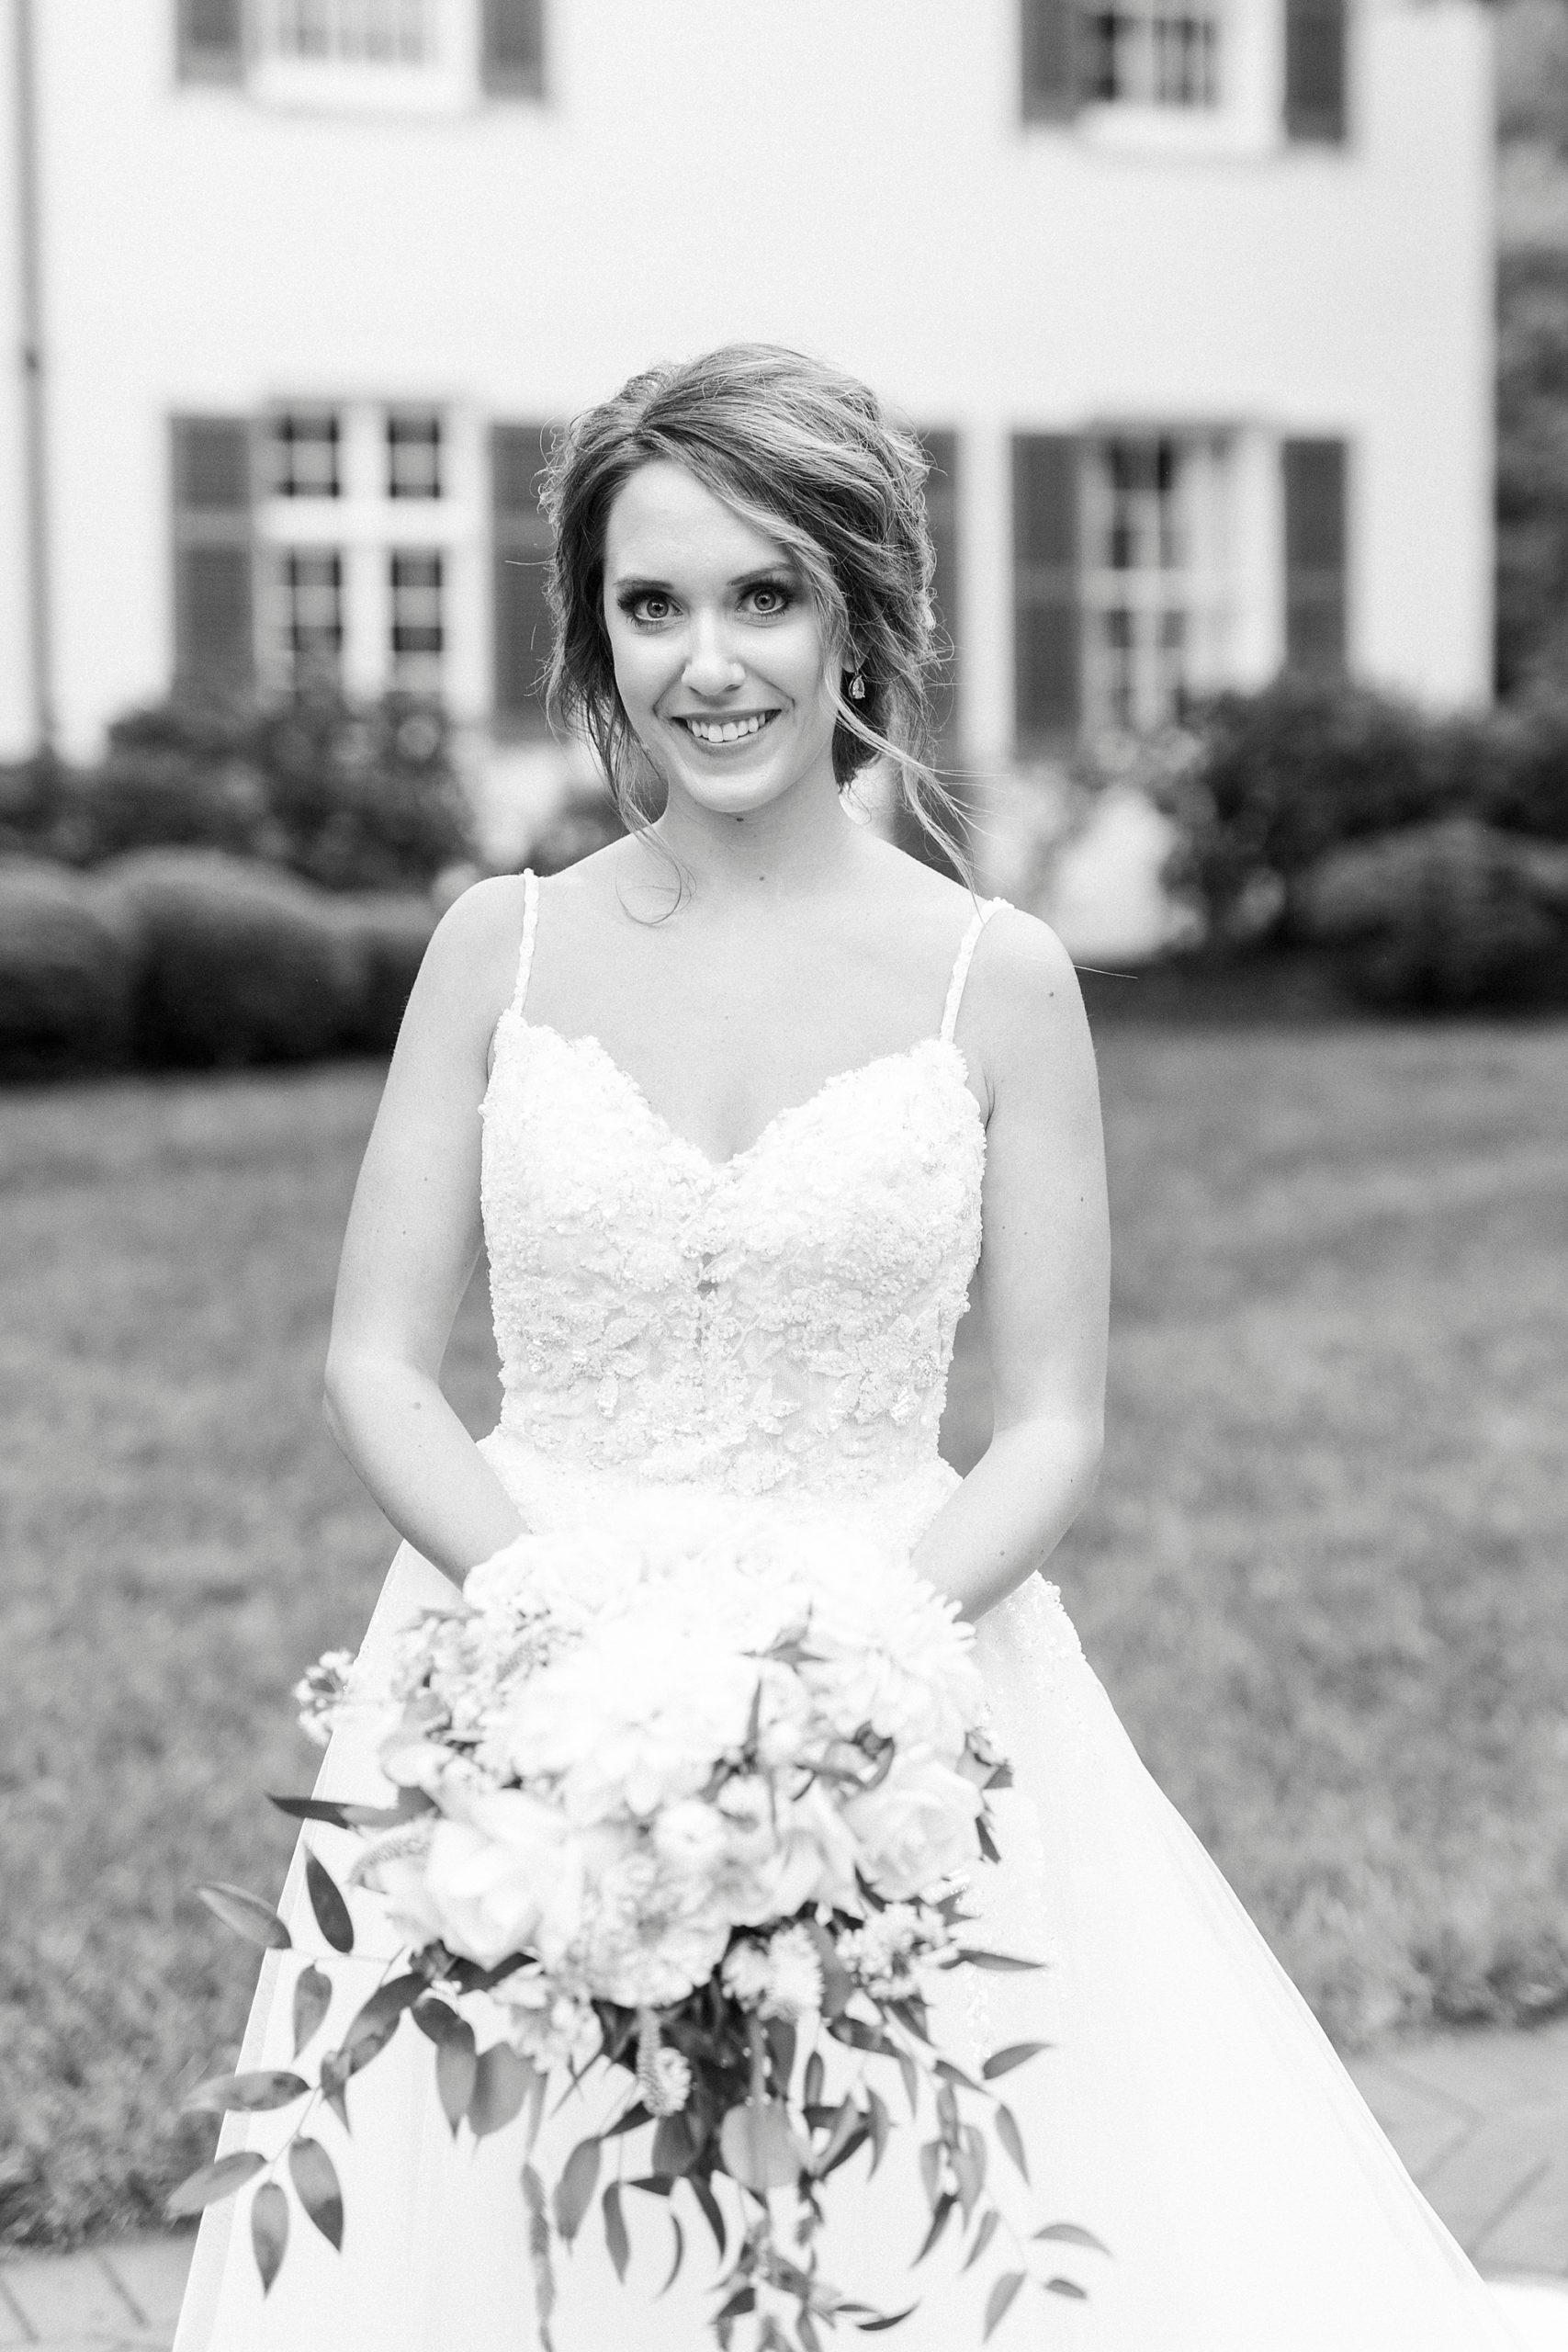 black and white portrait of bride standing on lawn in wedding gown